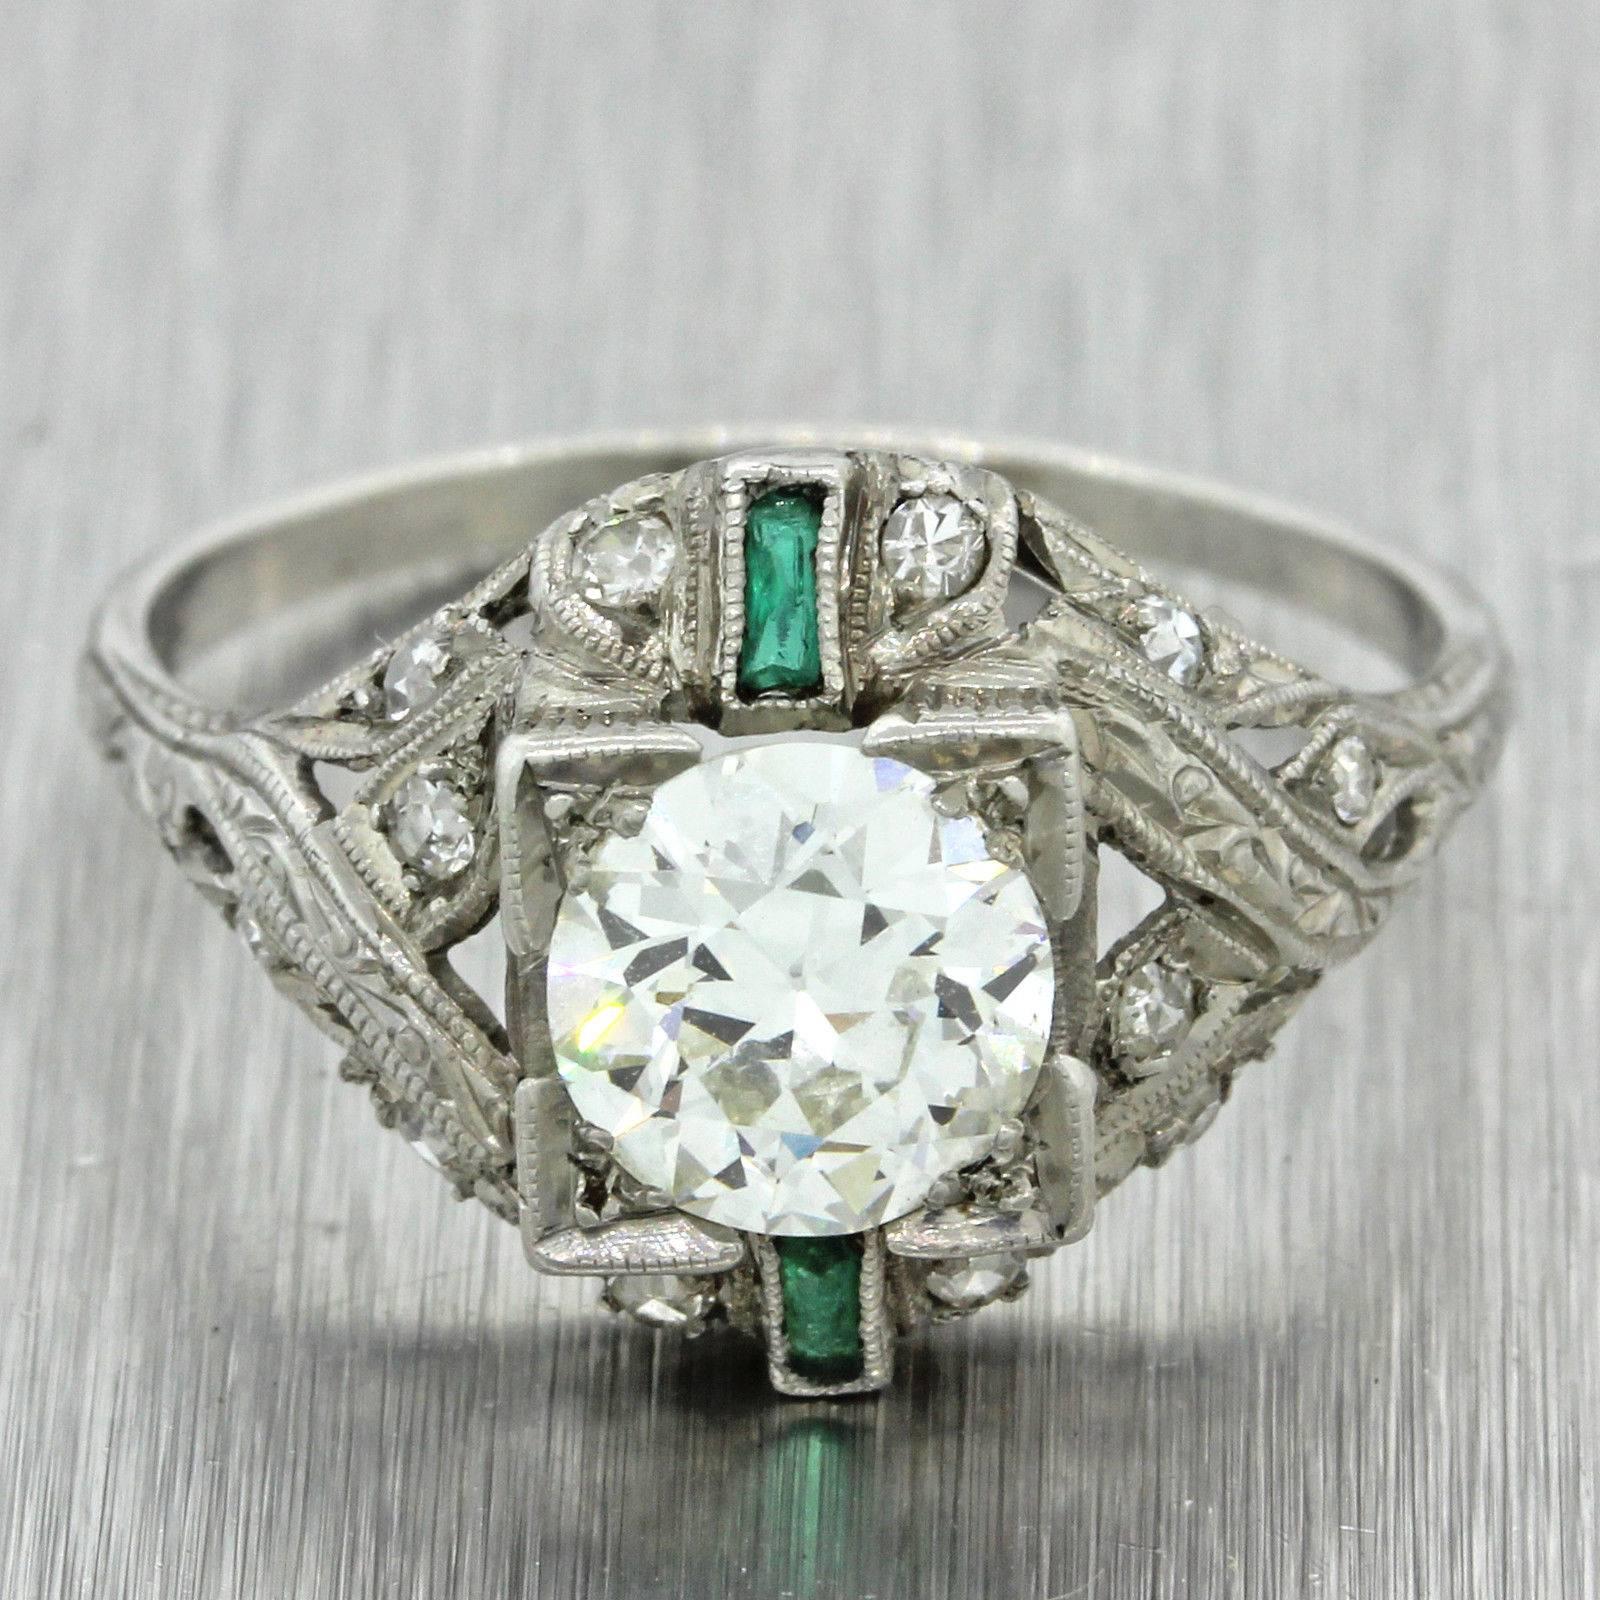 This is a beautiful 1920s Antique Art Deco Solid Platinum 1.51ctw Diamond Baguette Emerald Ring EGL. It will come in a lovely ring box for a perfect presentation and our unconditional 30 day money back return policy.

Gender 	Women's
Ring Size	8.5 -